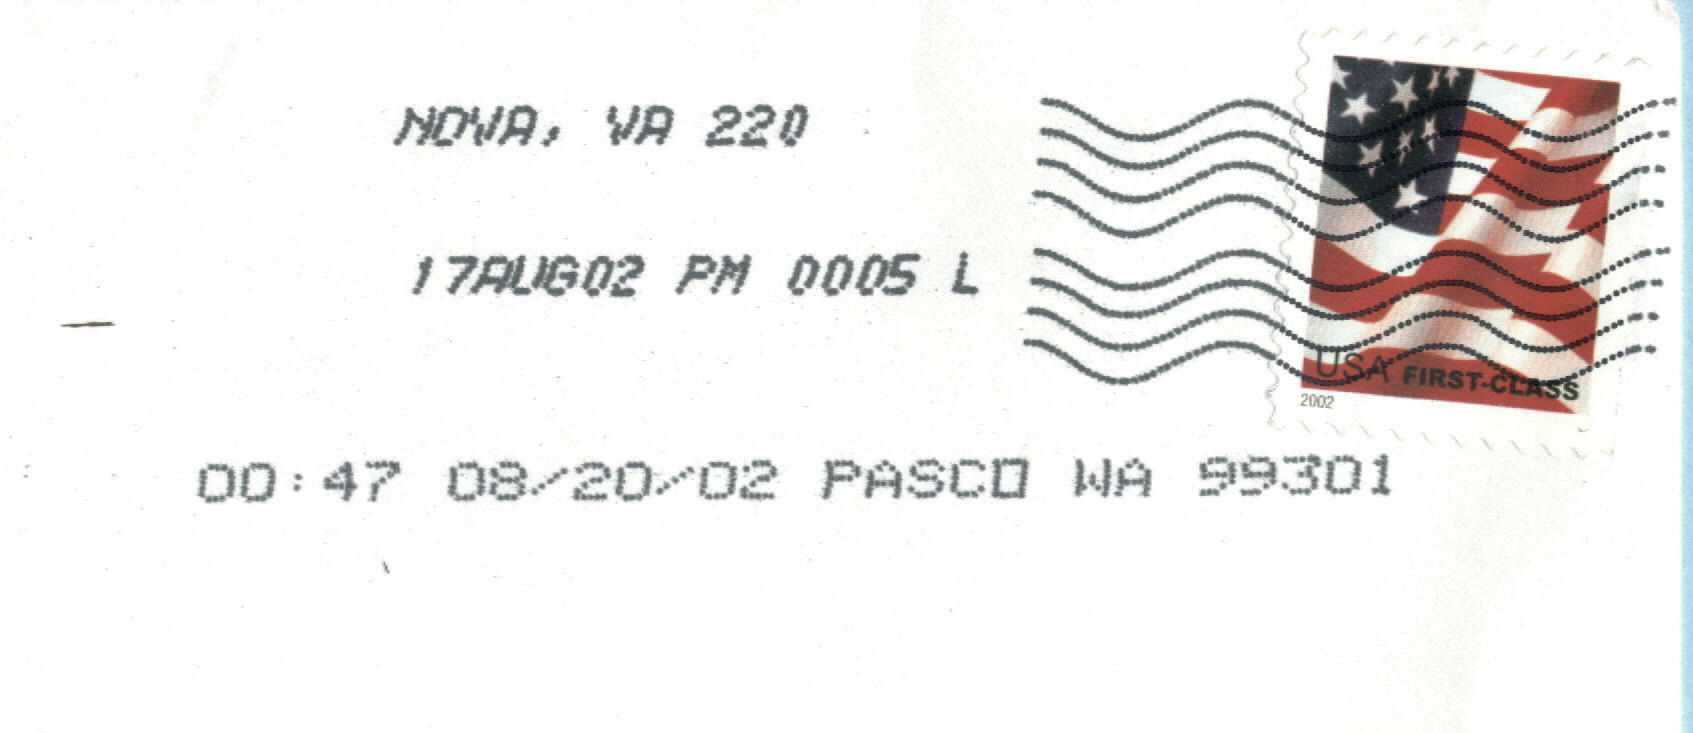 a Scan of an early USPS Inkjet Cancel from NO VA, 2002